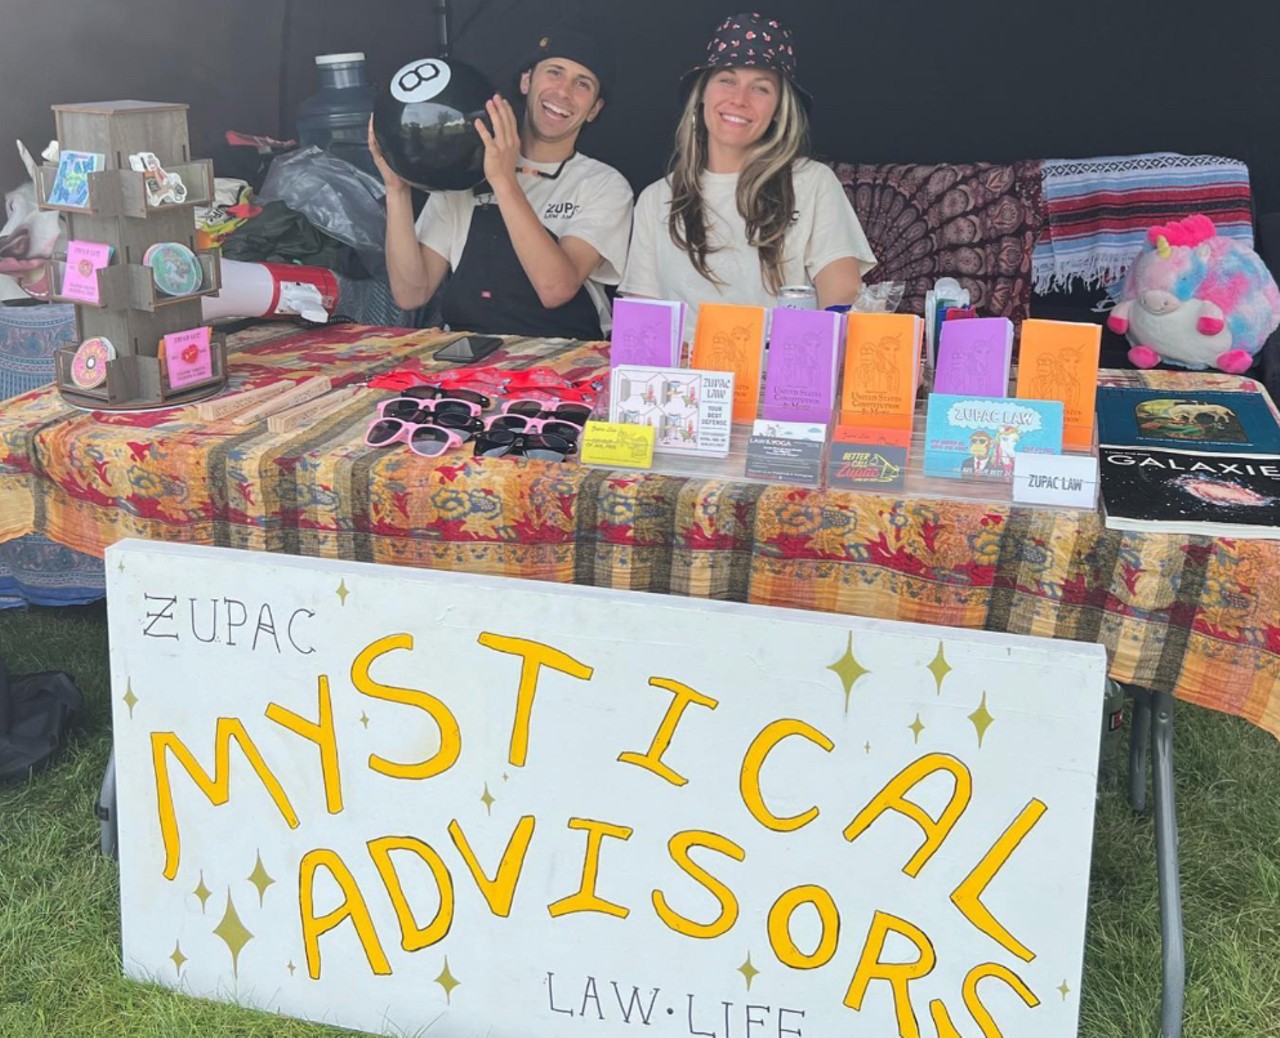 
Outdoor Flea Market
When: April 27 from 12-4 p.m.
Where: 1719 Crooks Rd. (Royal Oak)
What: A flea market and celebration
Who: Zupac Law and Art Night Detroit 
Why: The annual outdoor market will celebrate five years of Zupac Law, plus feature a variety of local vendors, music, and a food truck. This year’s non-profit collaboration is with Art Night Detroit and all raffle proceeds will be donated to help the organization fund art supplies and more local events.